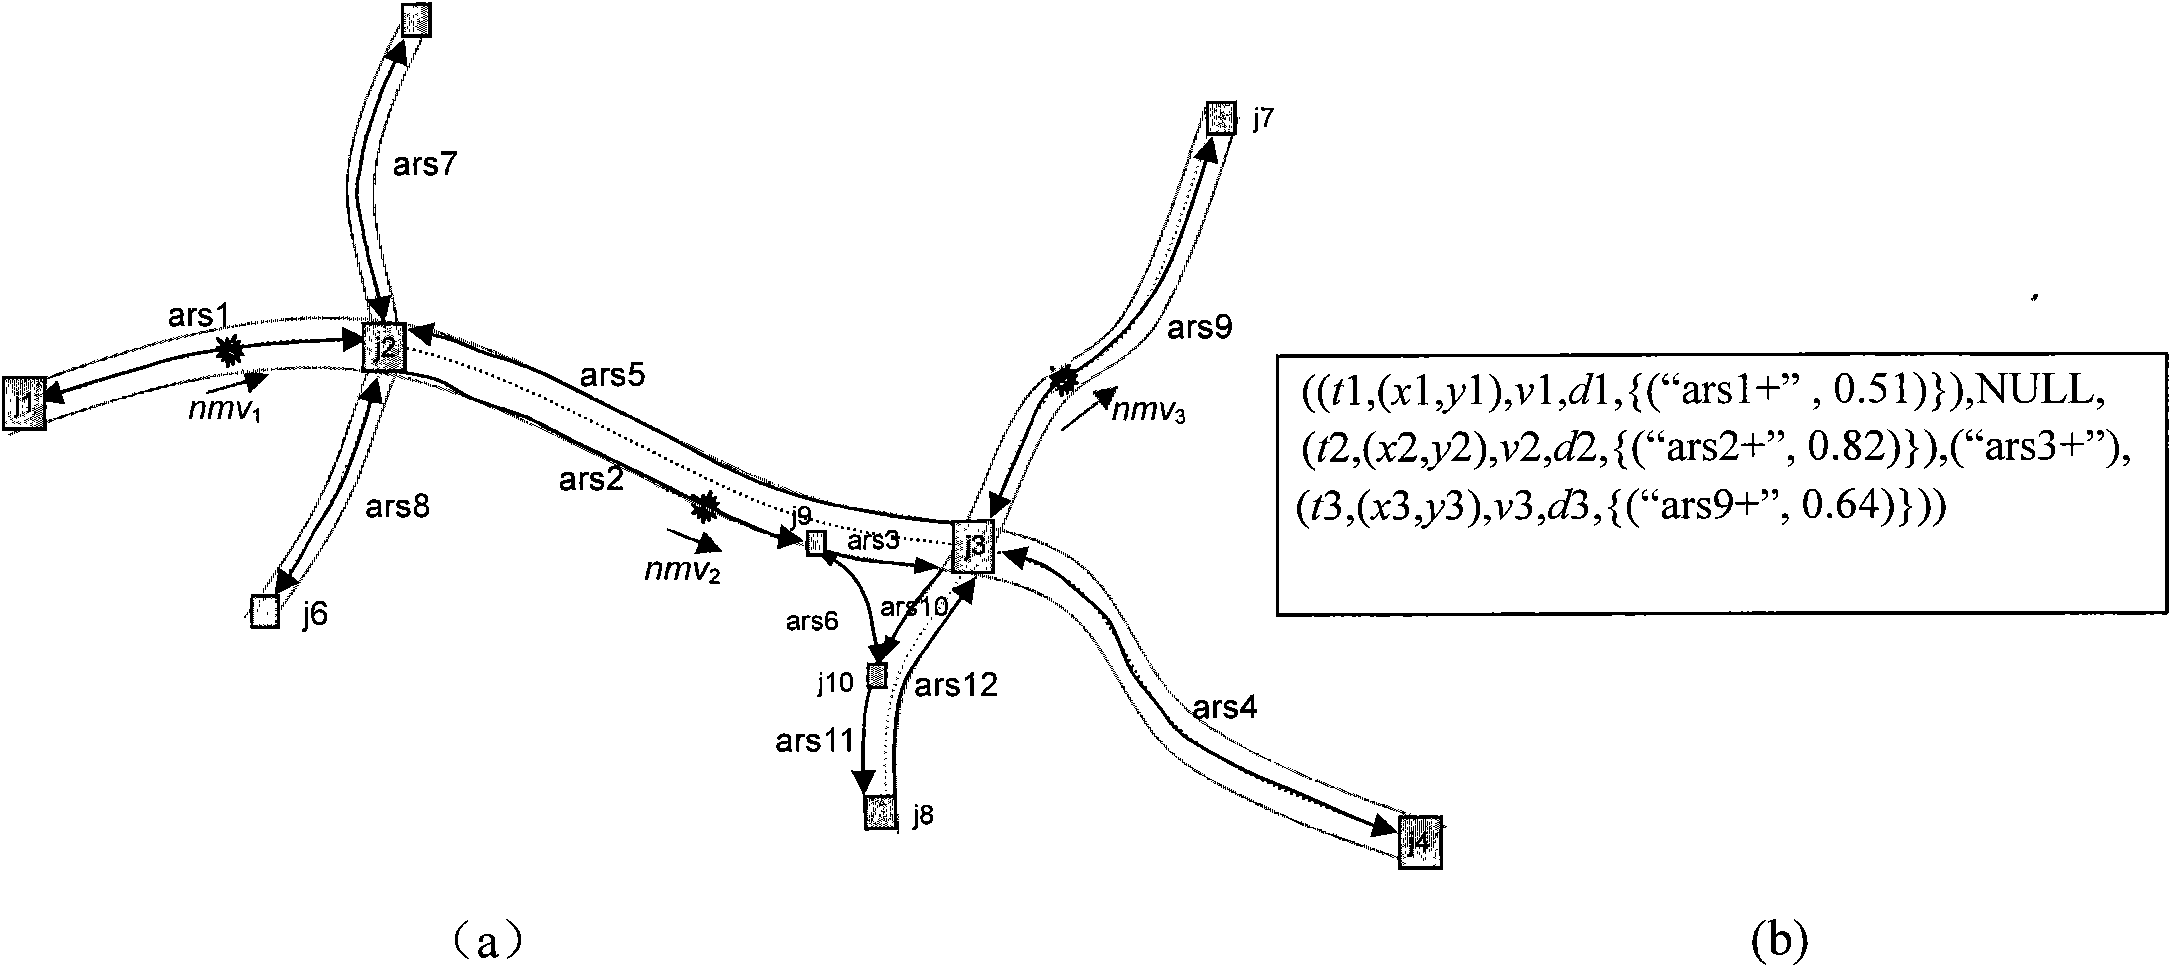 Method for acquiring road network matching track of mobile object